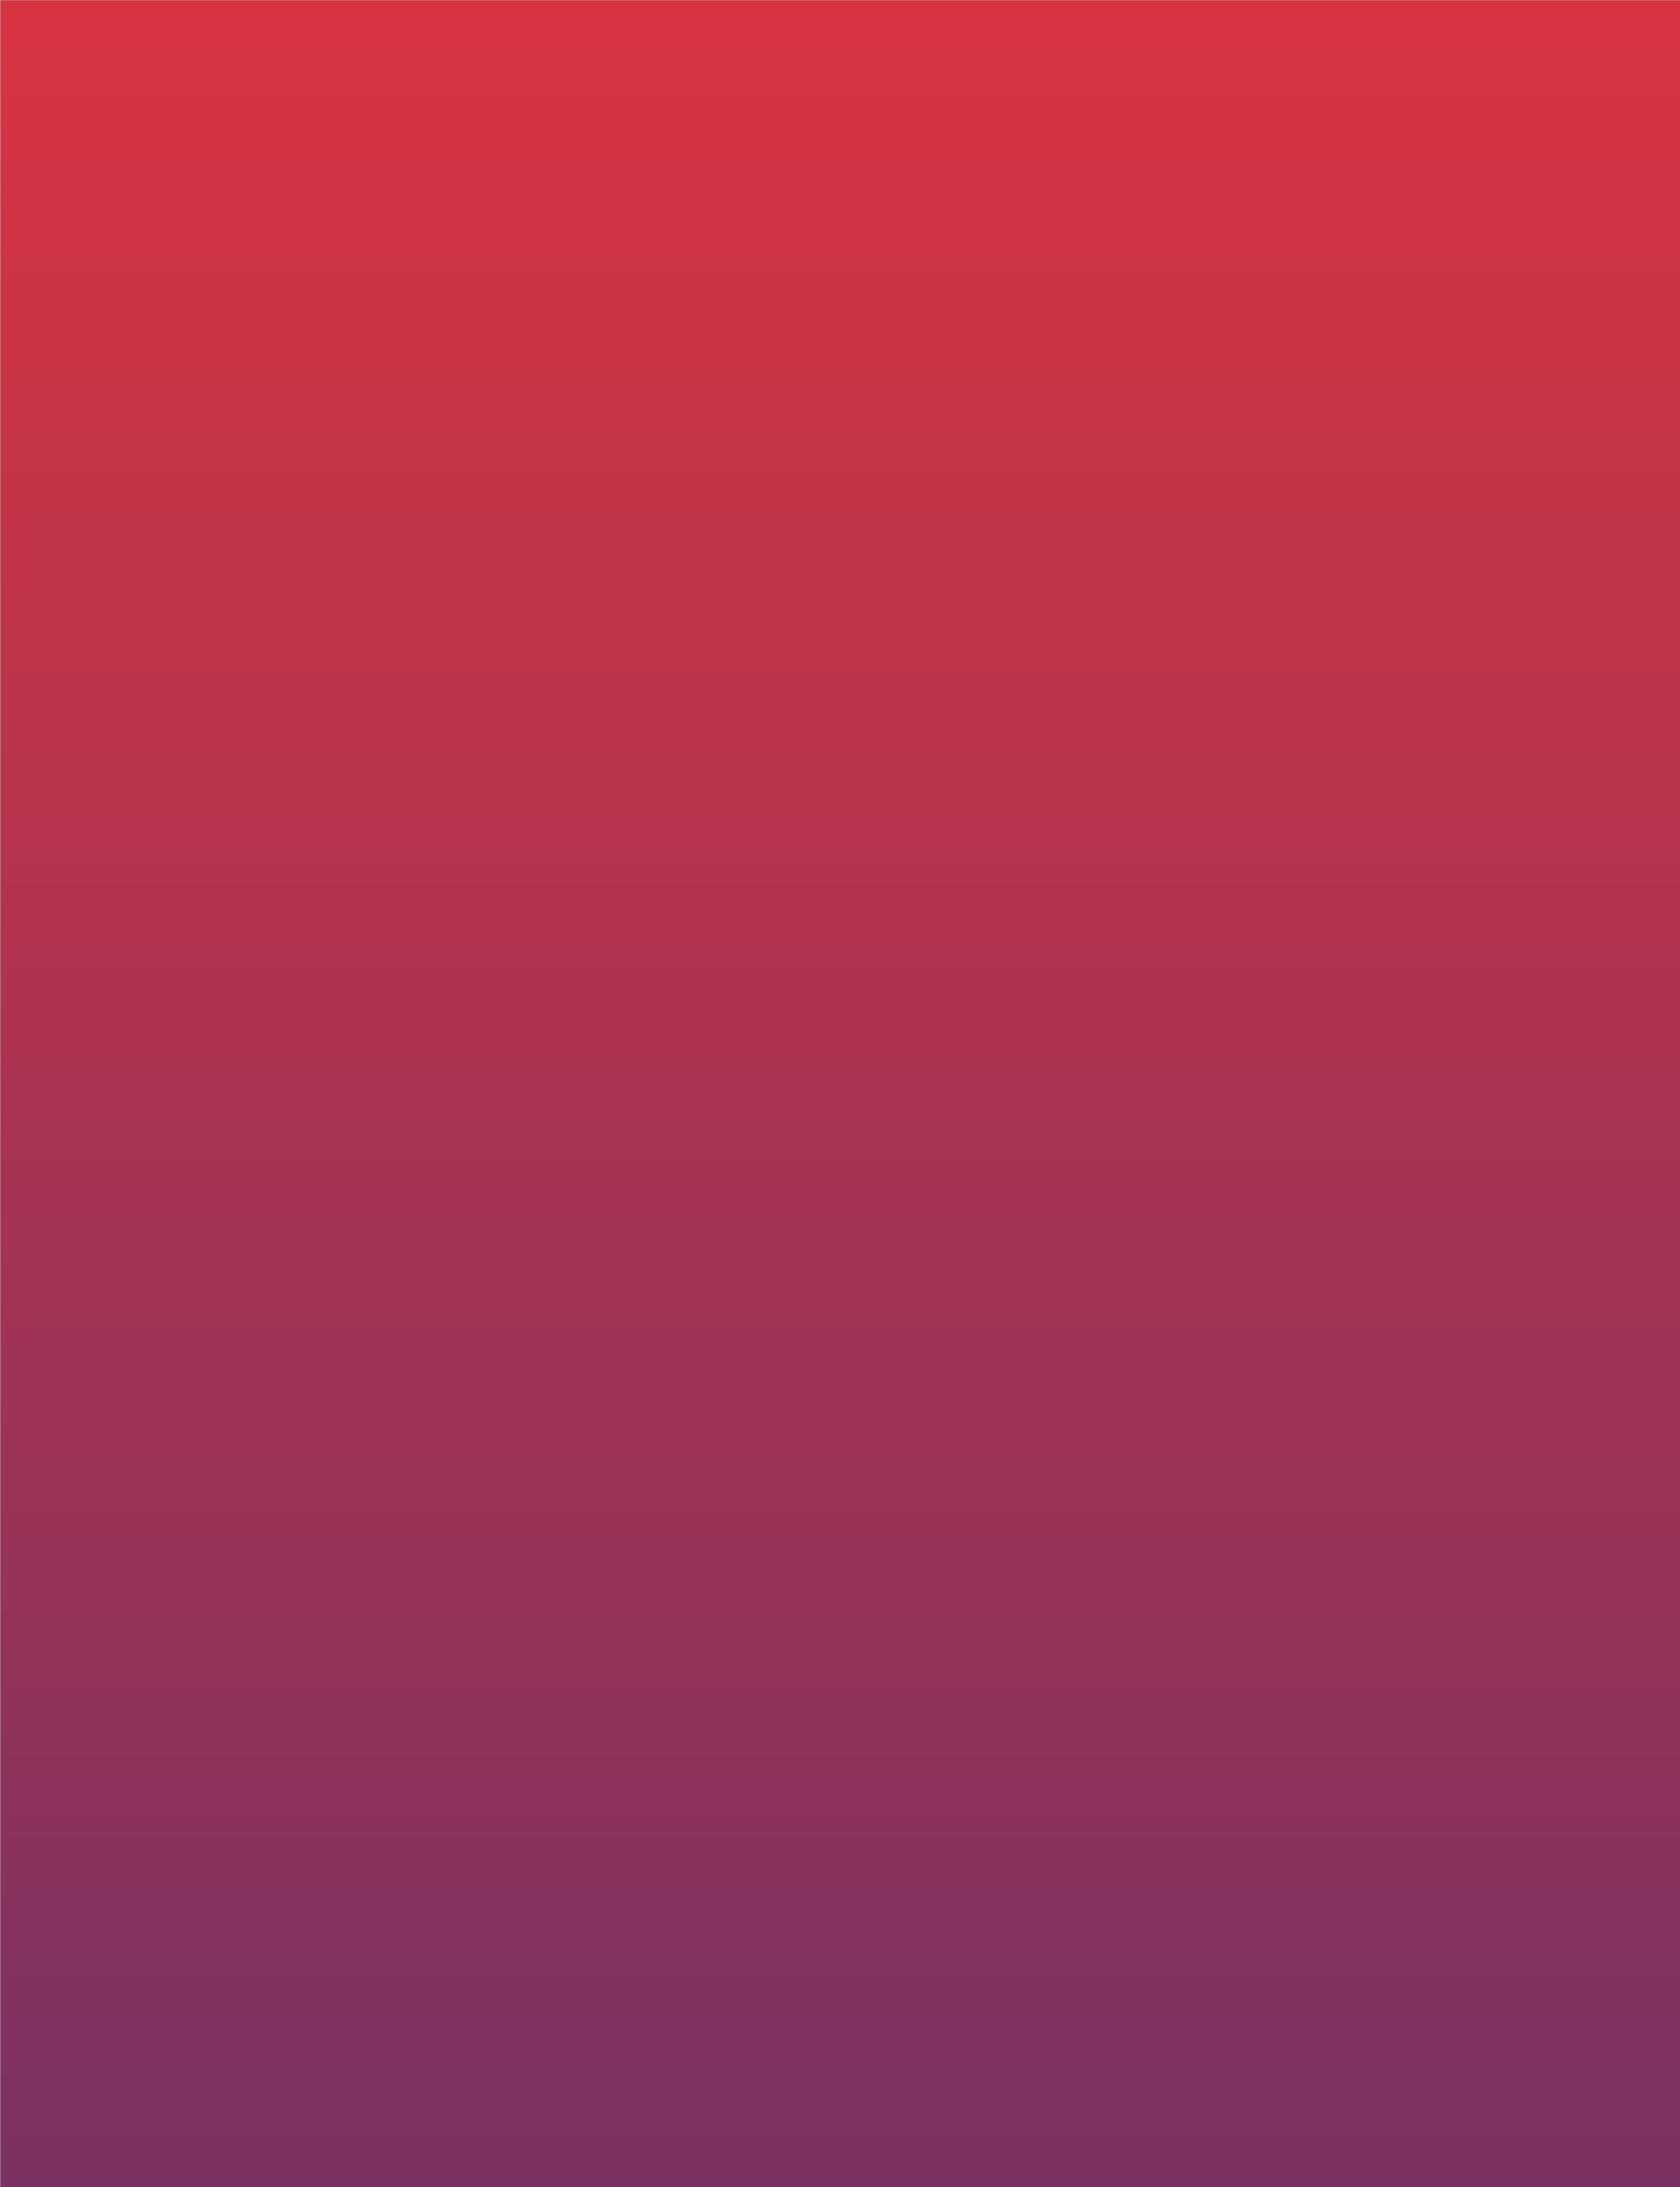 red fade to purple background